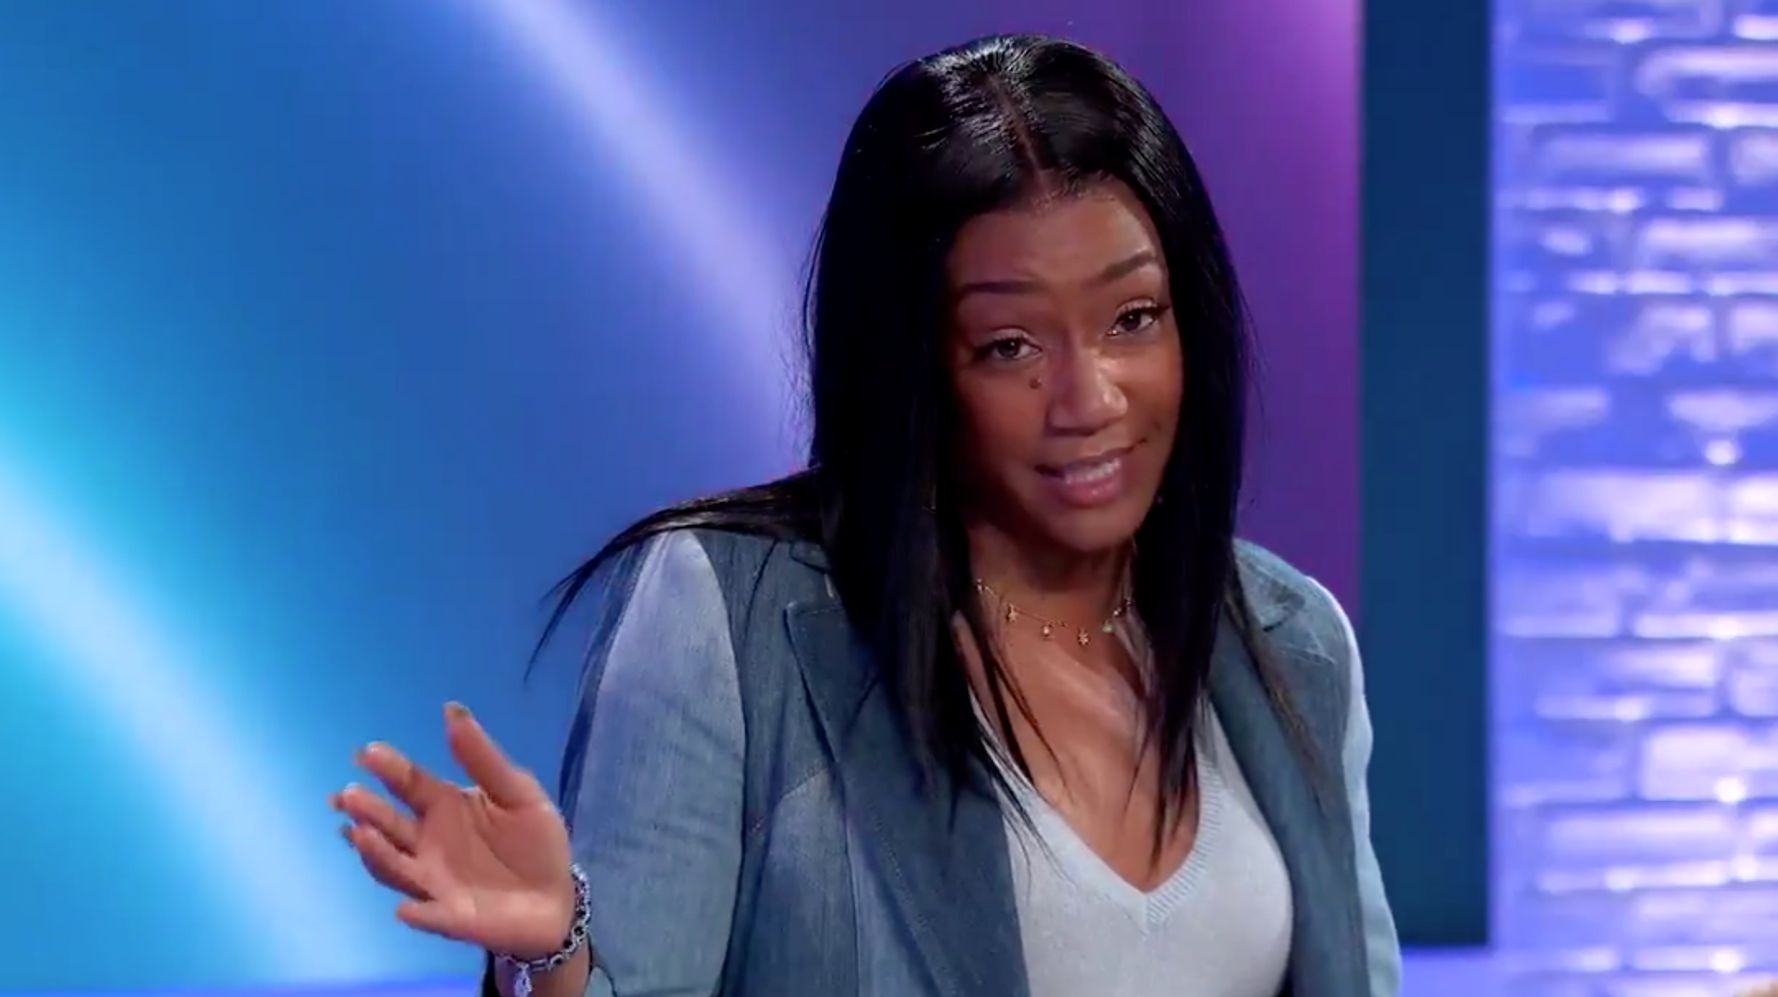 Tiffany Haddish to find out she won an ounce is absolutely priceless